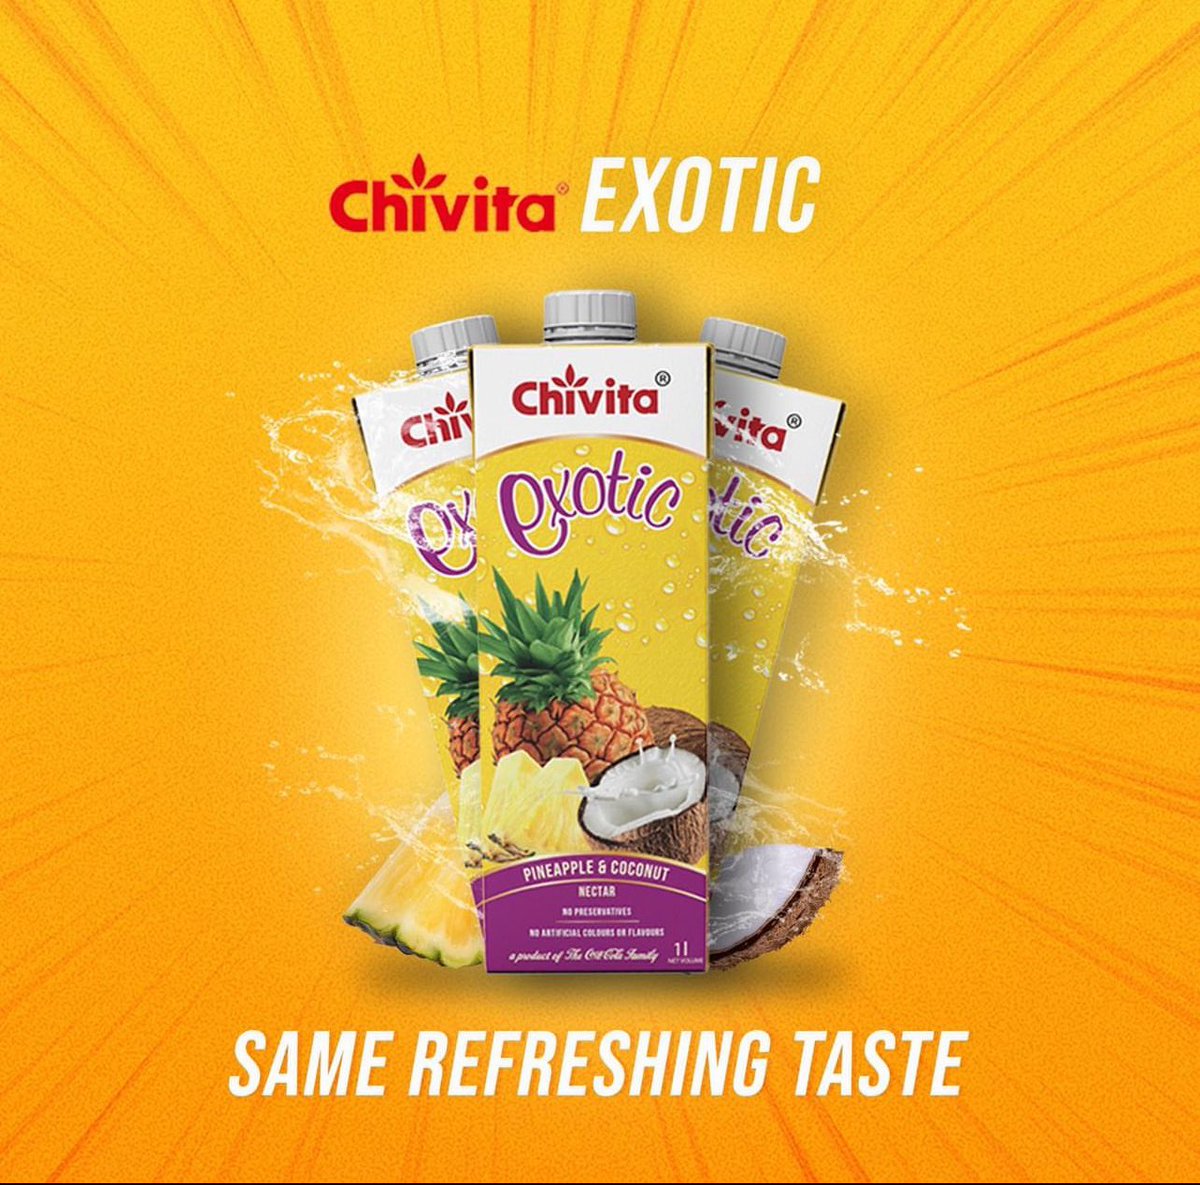 If I want to be honest this Chivita exotic will actually pass for my fave variant of Chivita , the taste is just divine 
#EveryoneHasAChivita
#WhatsYourChivita?